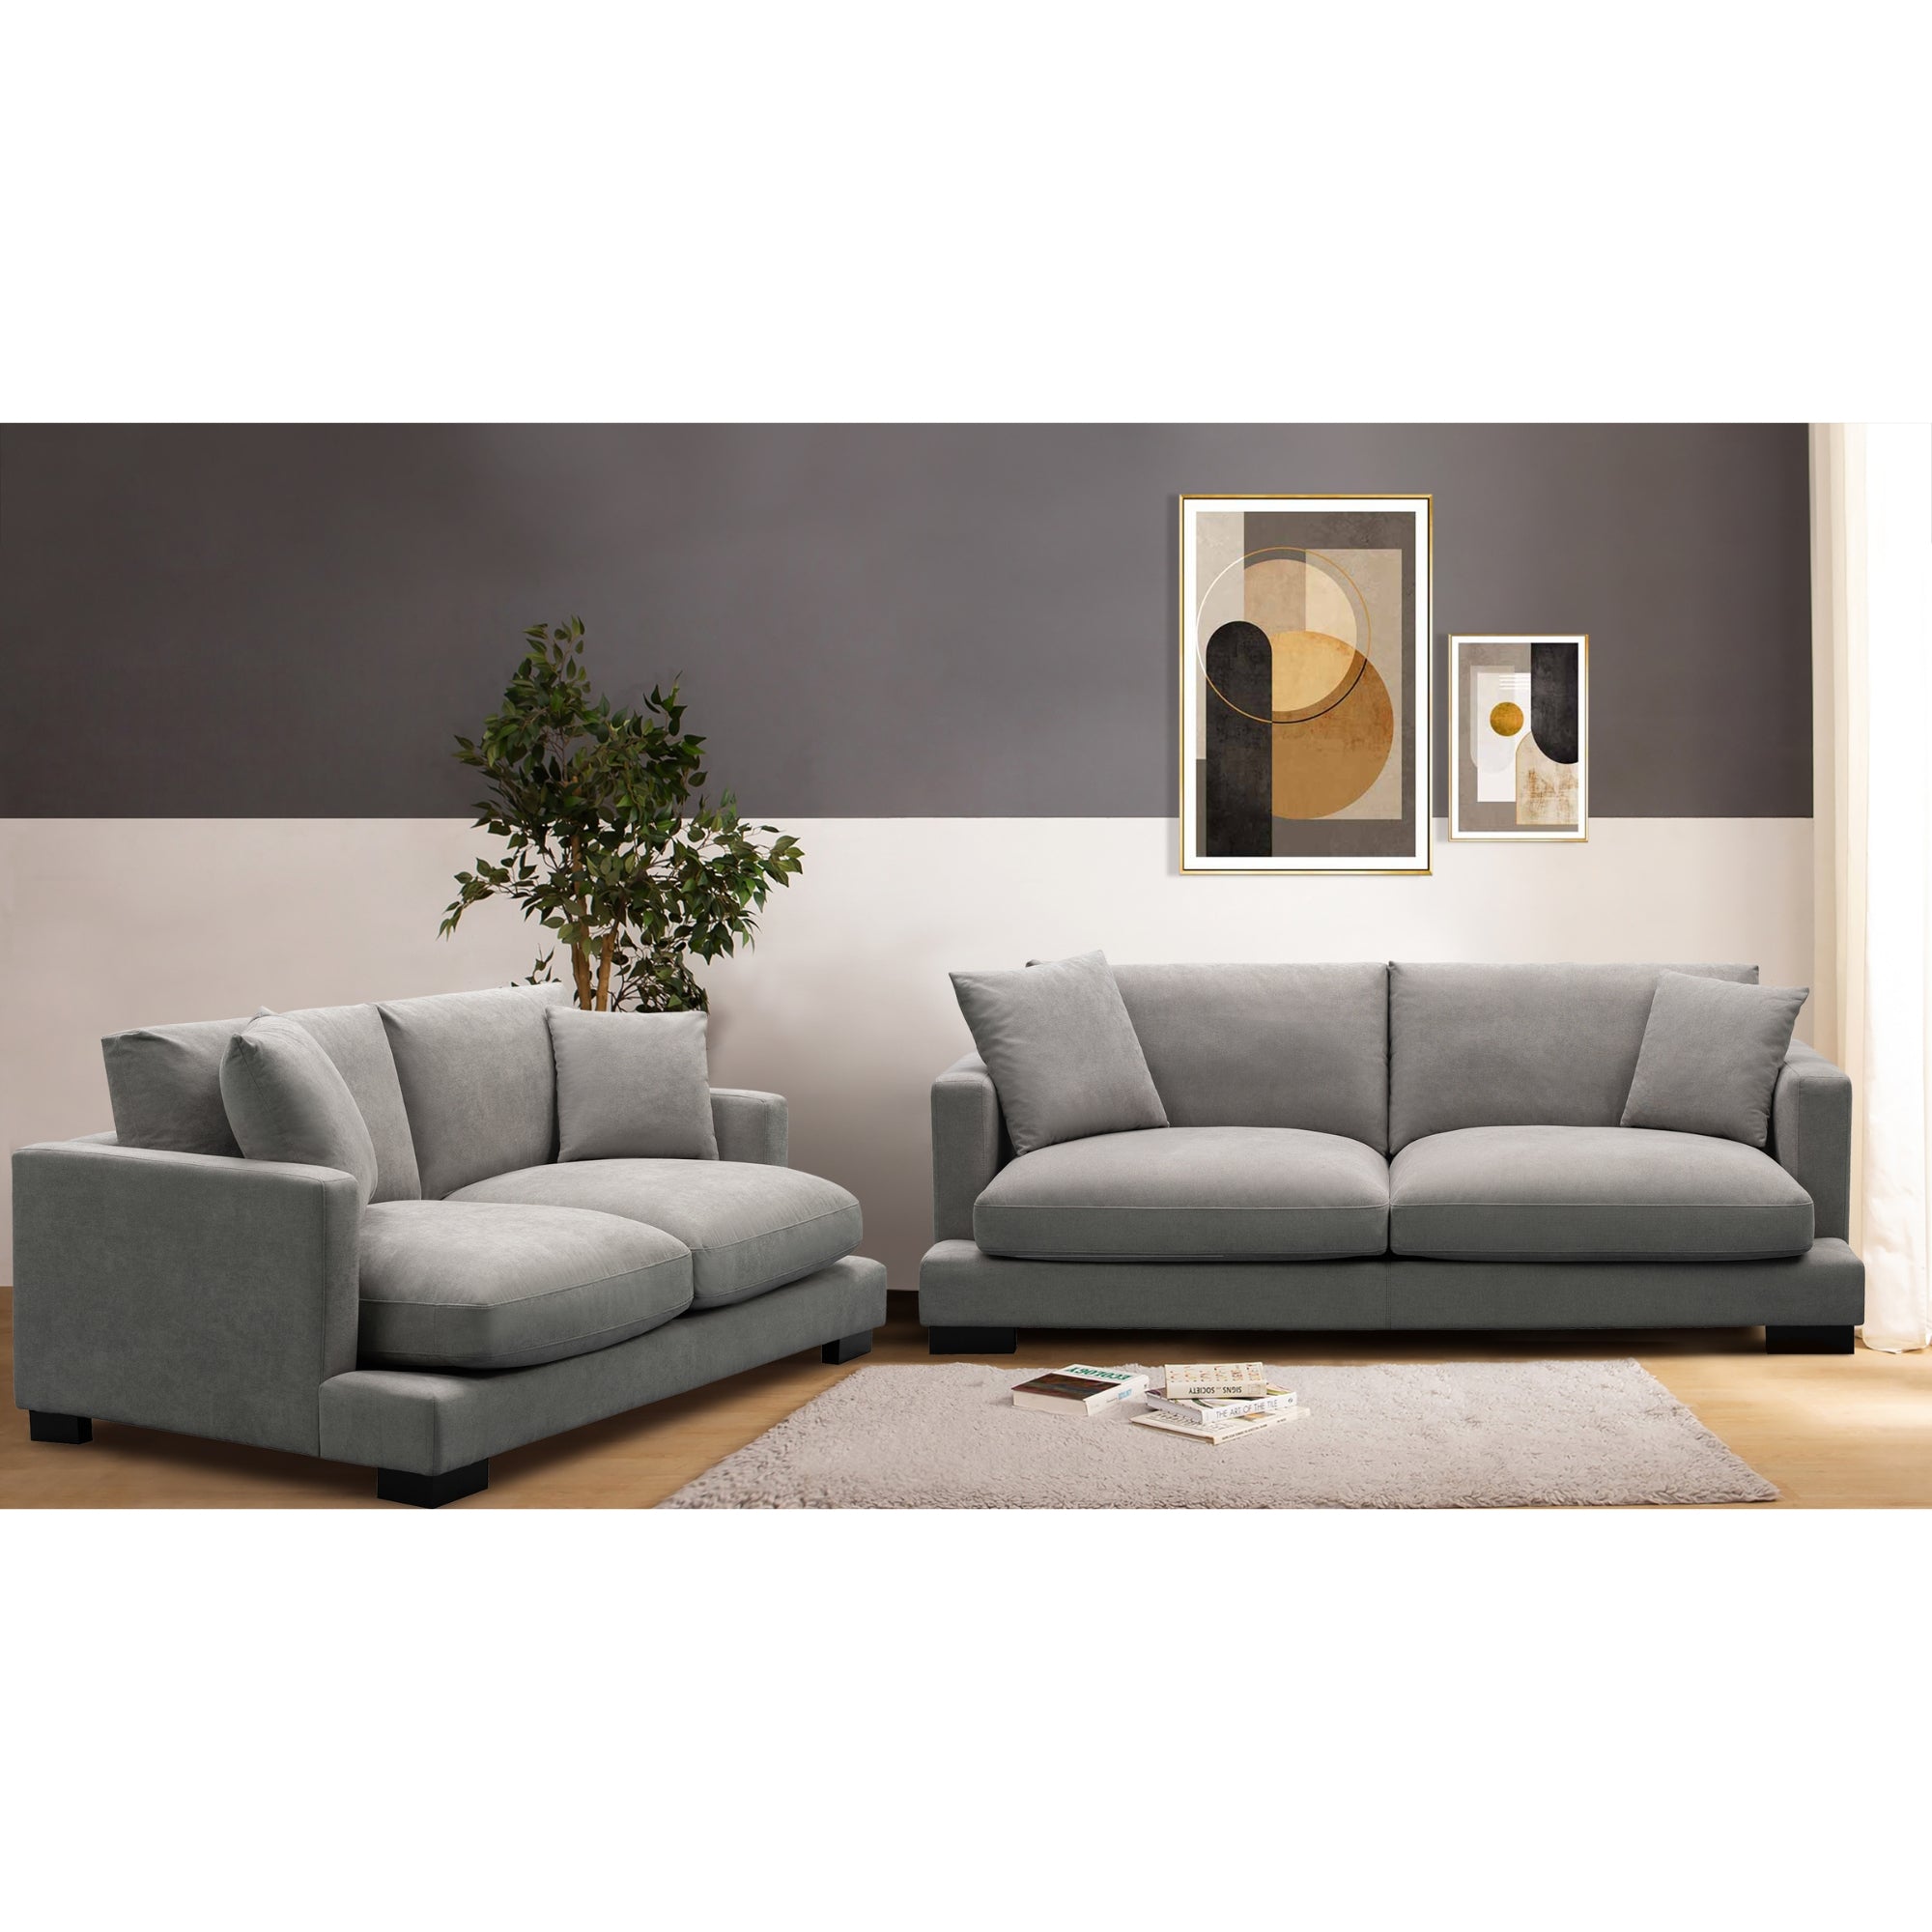 Royalty 3 + 2 Seater Sofa Fabric Uplholstered Lounge Couch - Grey